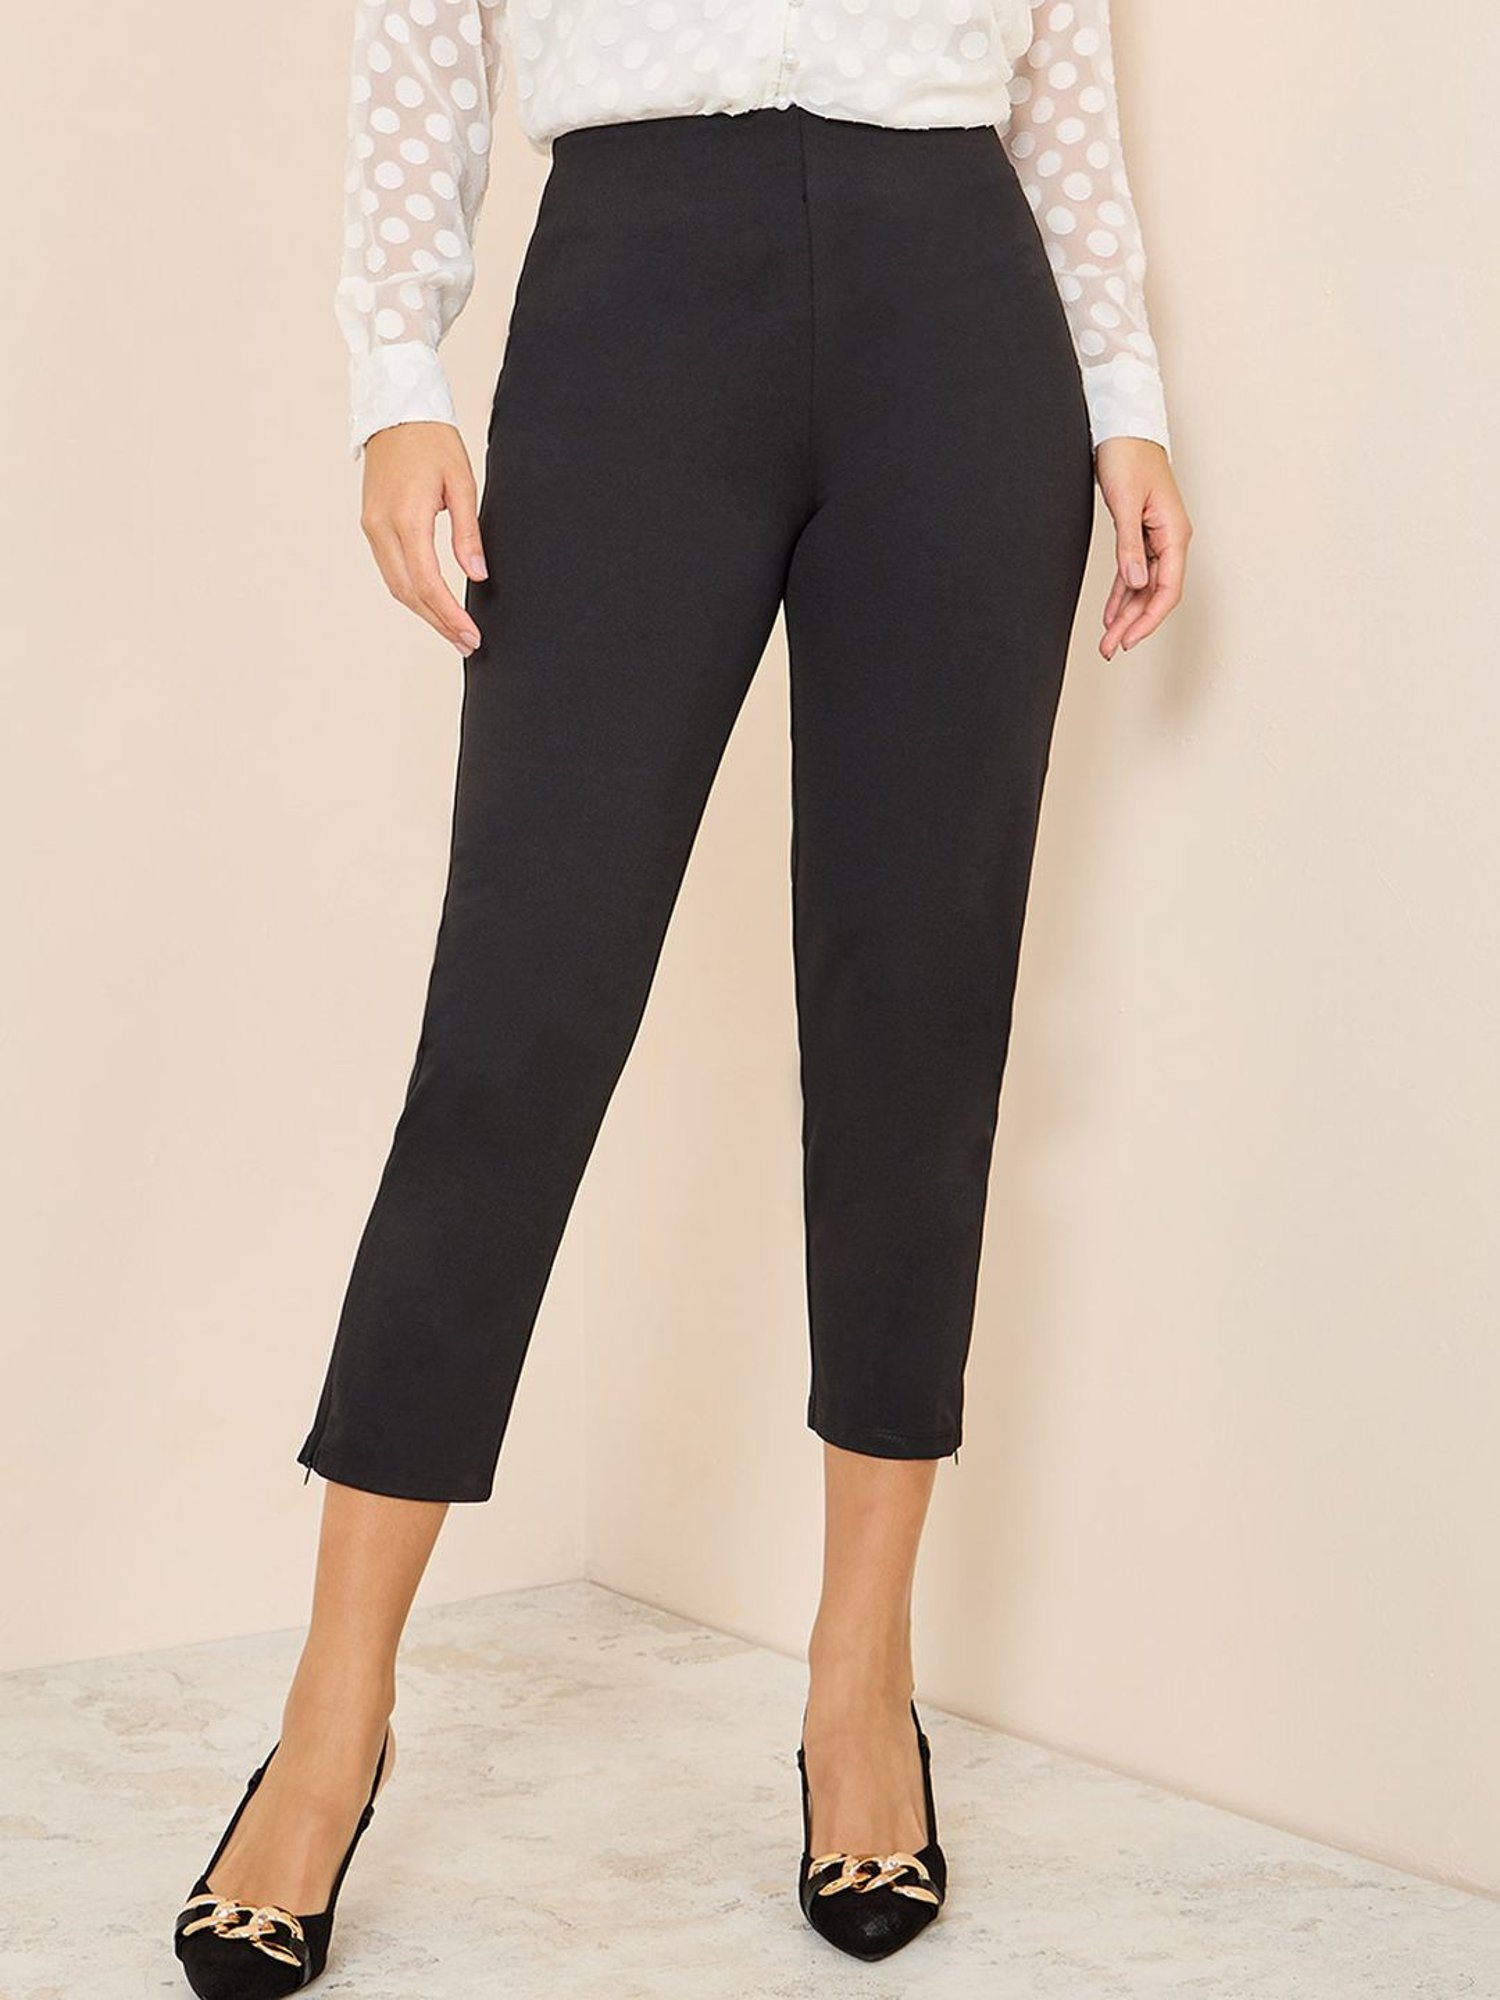 Kin Plain Cropped Slim Fit Tailored Trousers Brown 6